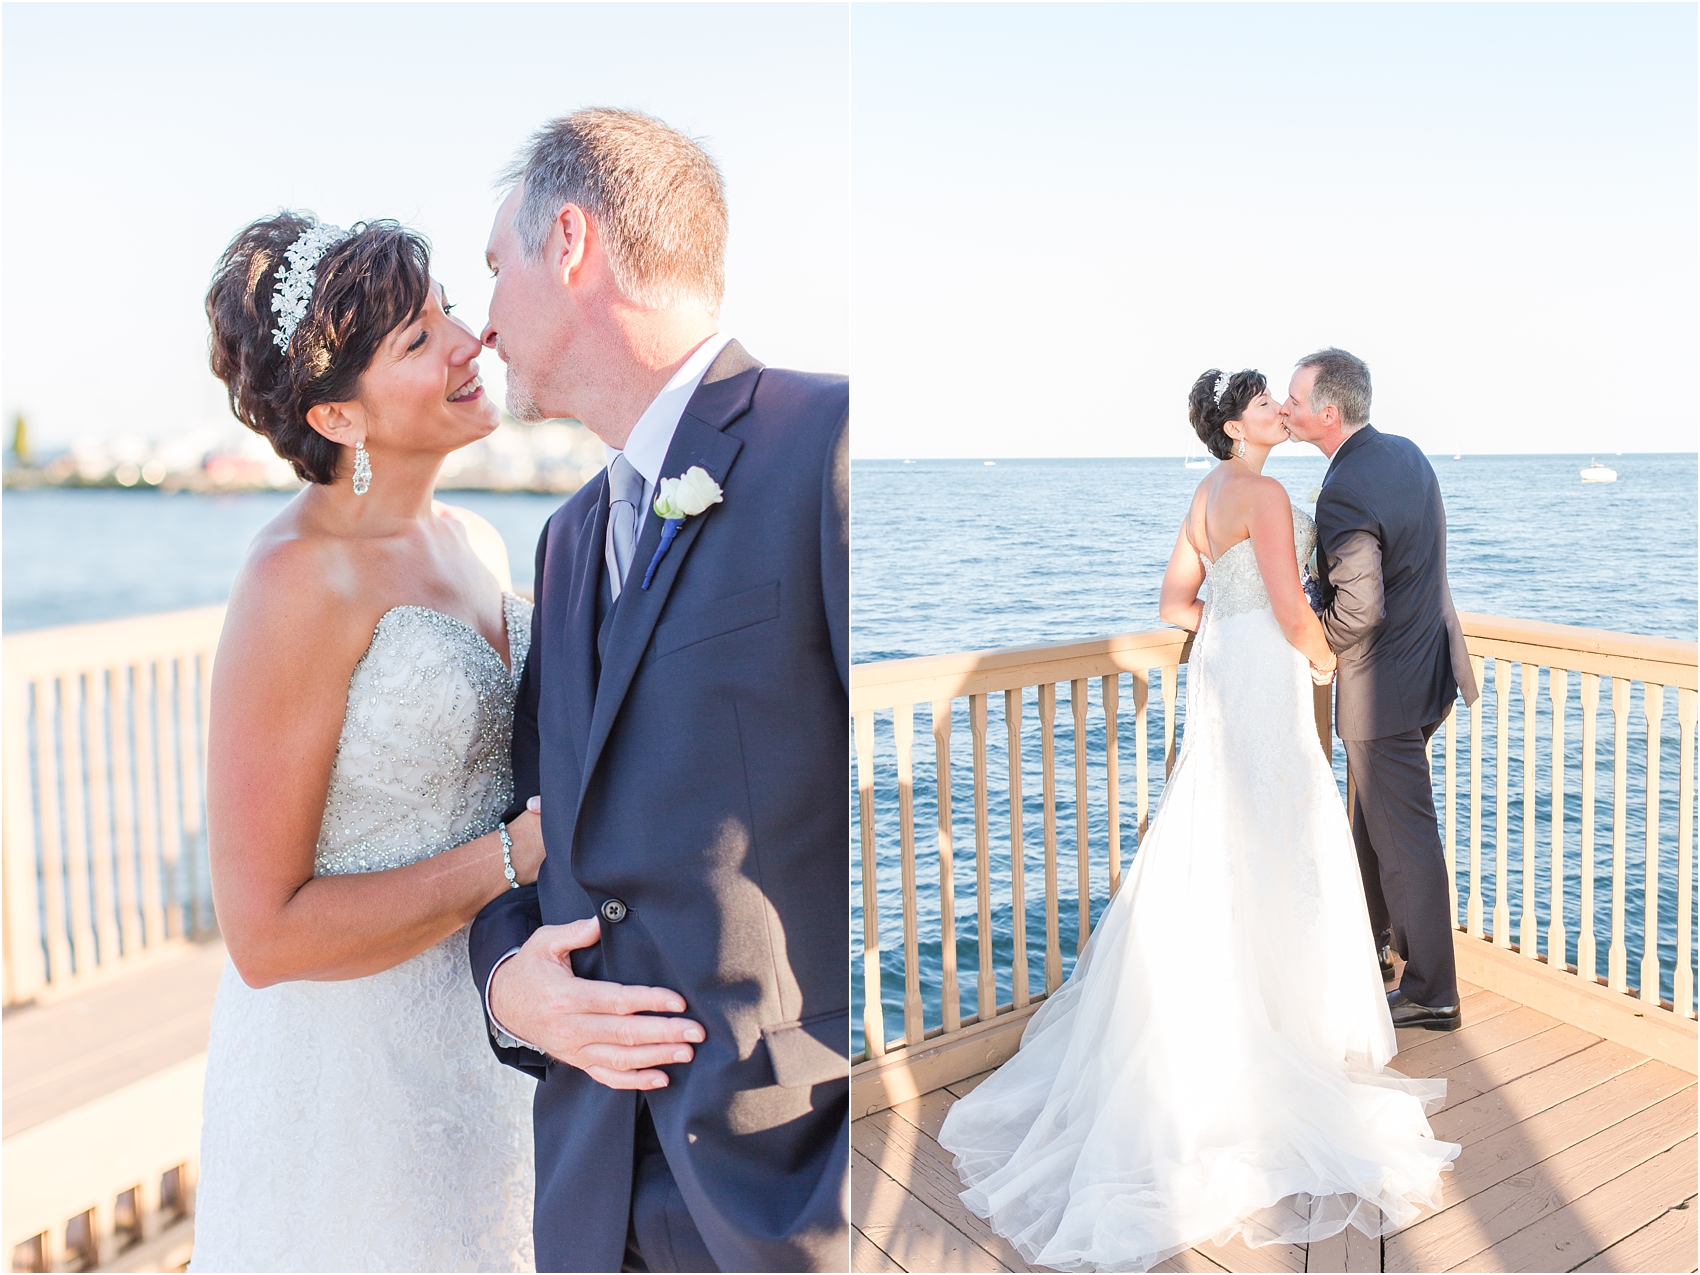 classic-natuical-inspired-wedding-photos-on-infinity-ovation-yacht-in-st-clair-shores-mi-by-courtney-carolyn-photography_0063.jpg